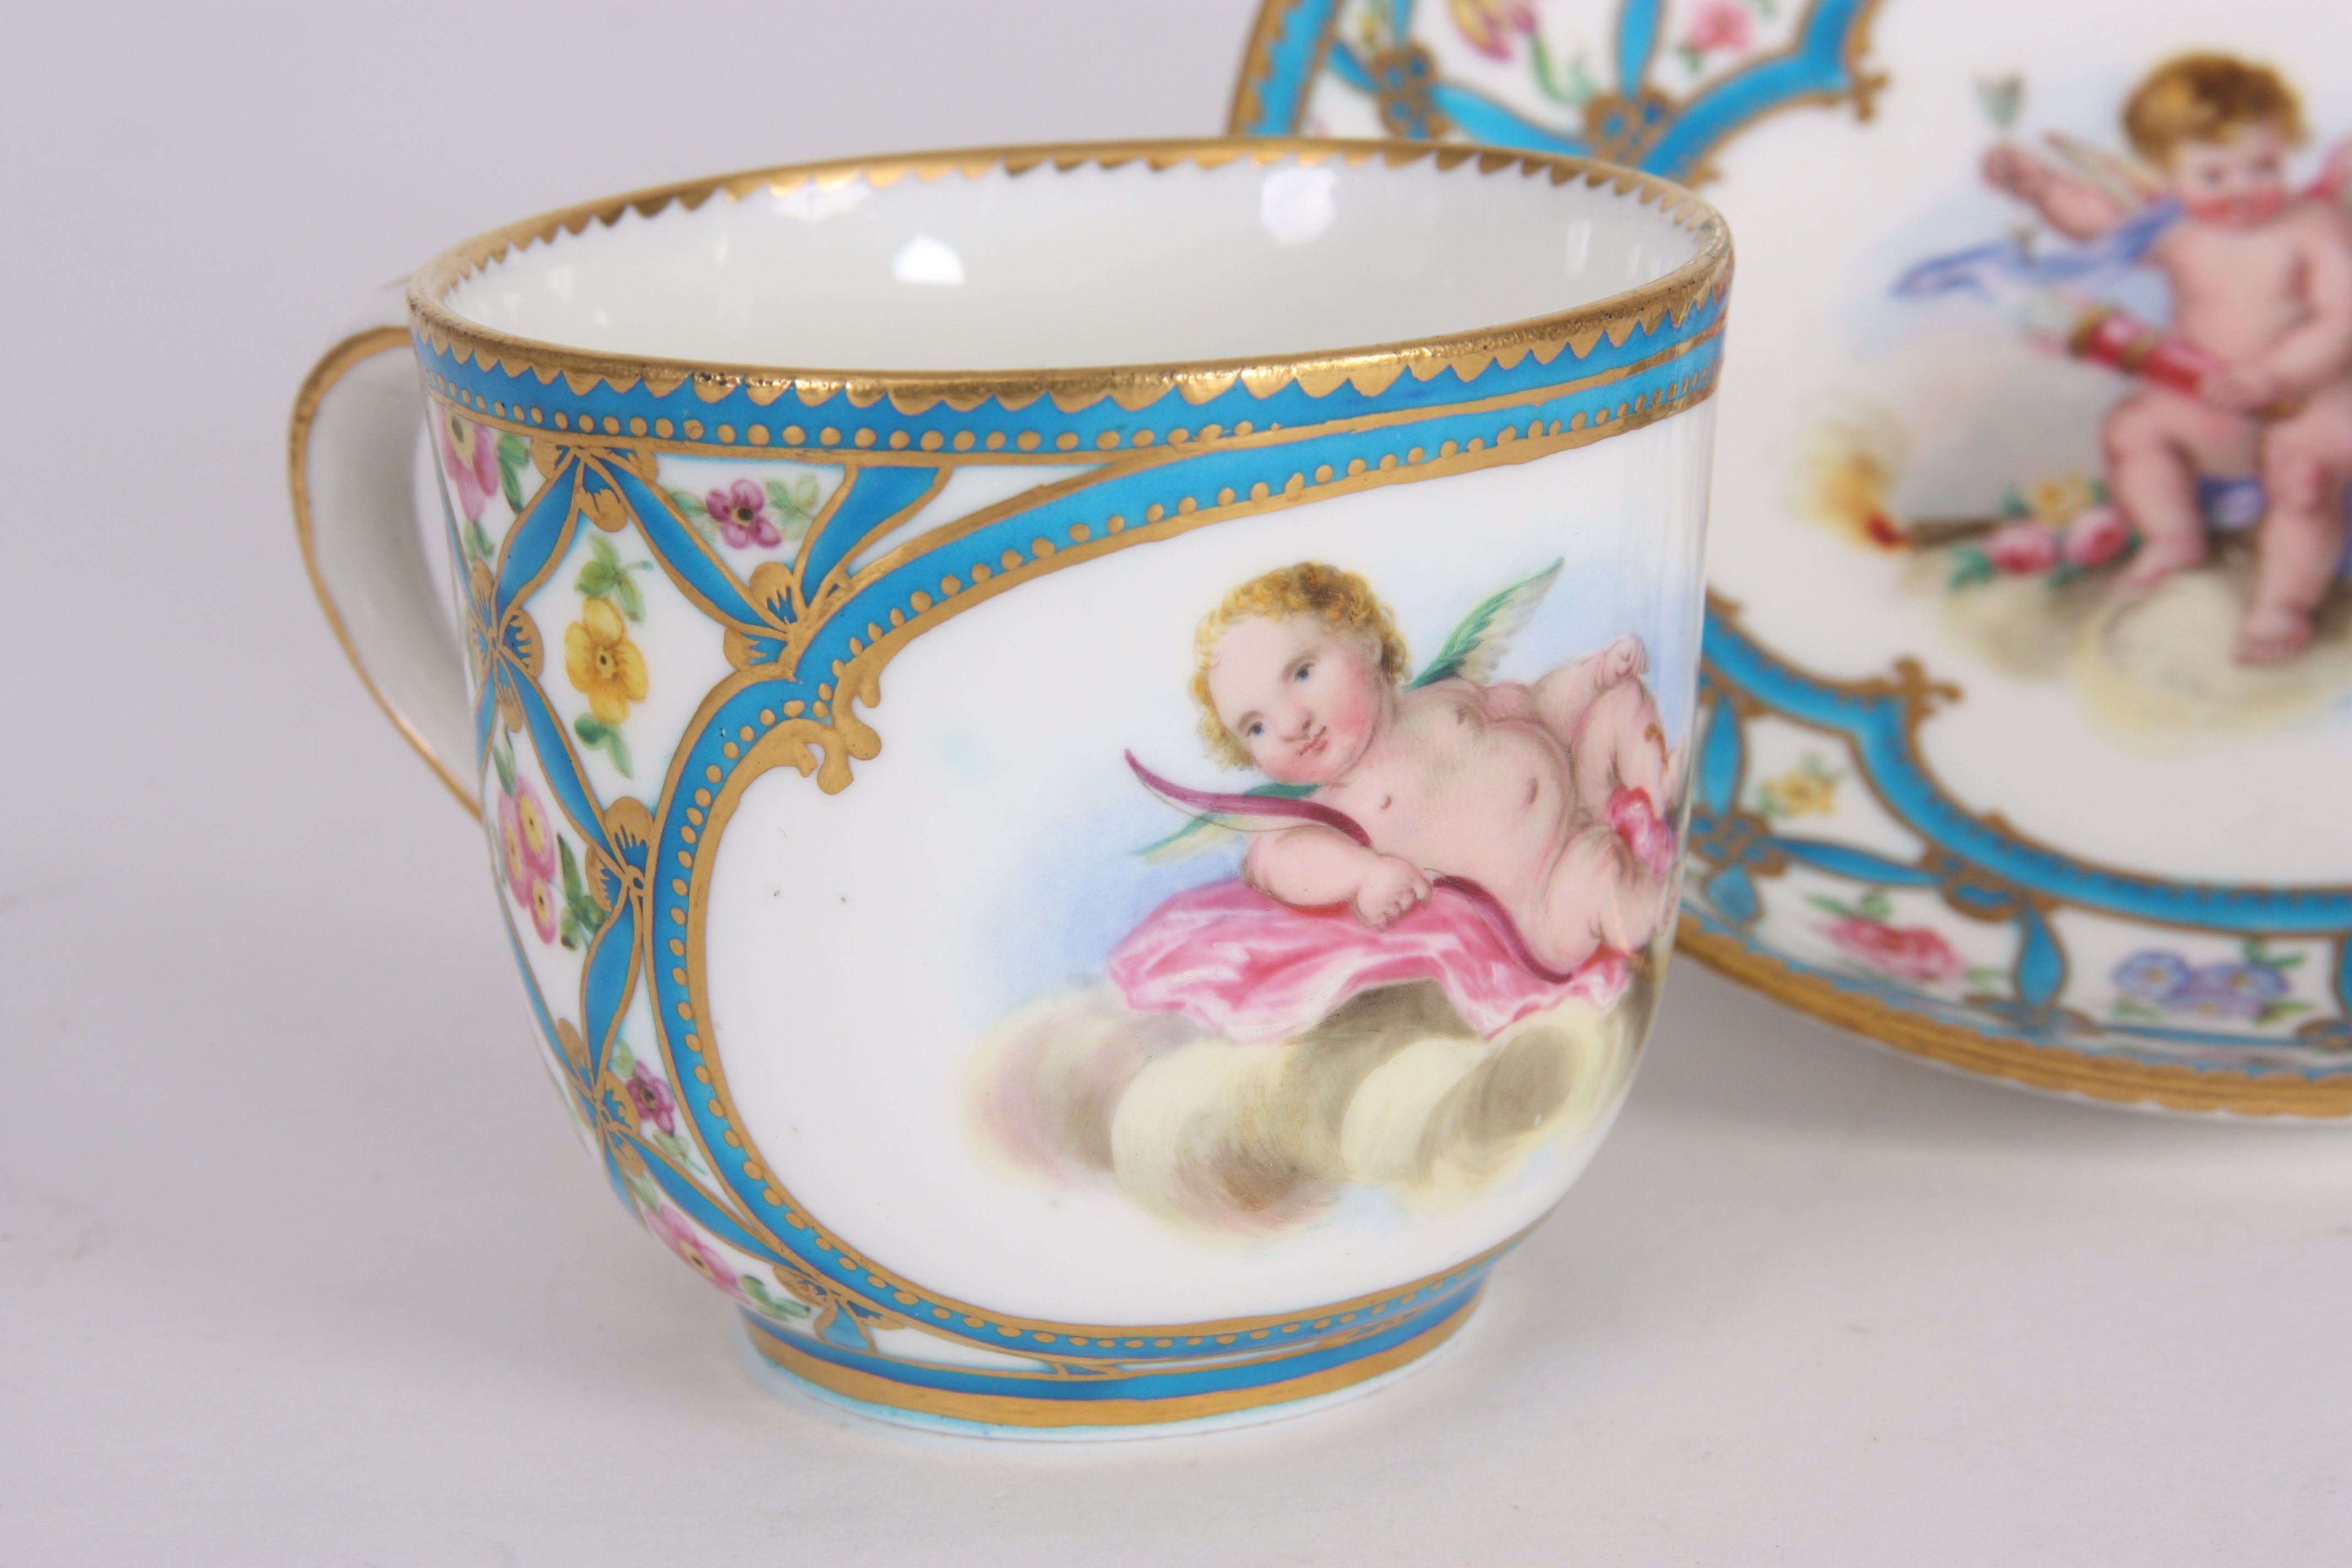 AN EARLY 19th CENTURY SERVES CUP AND SAUCER with flower and blue trellis decoration and painted - Image 2 of 4